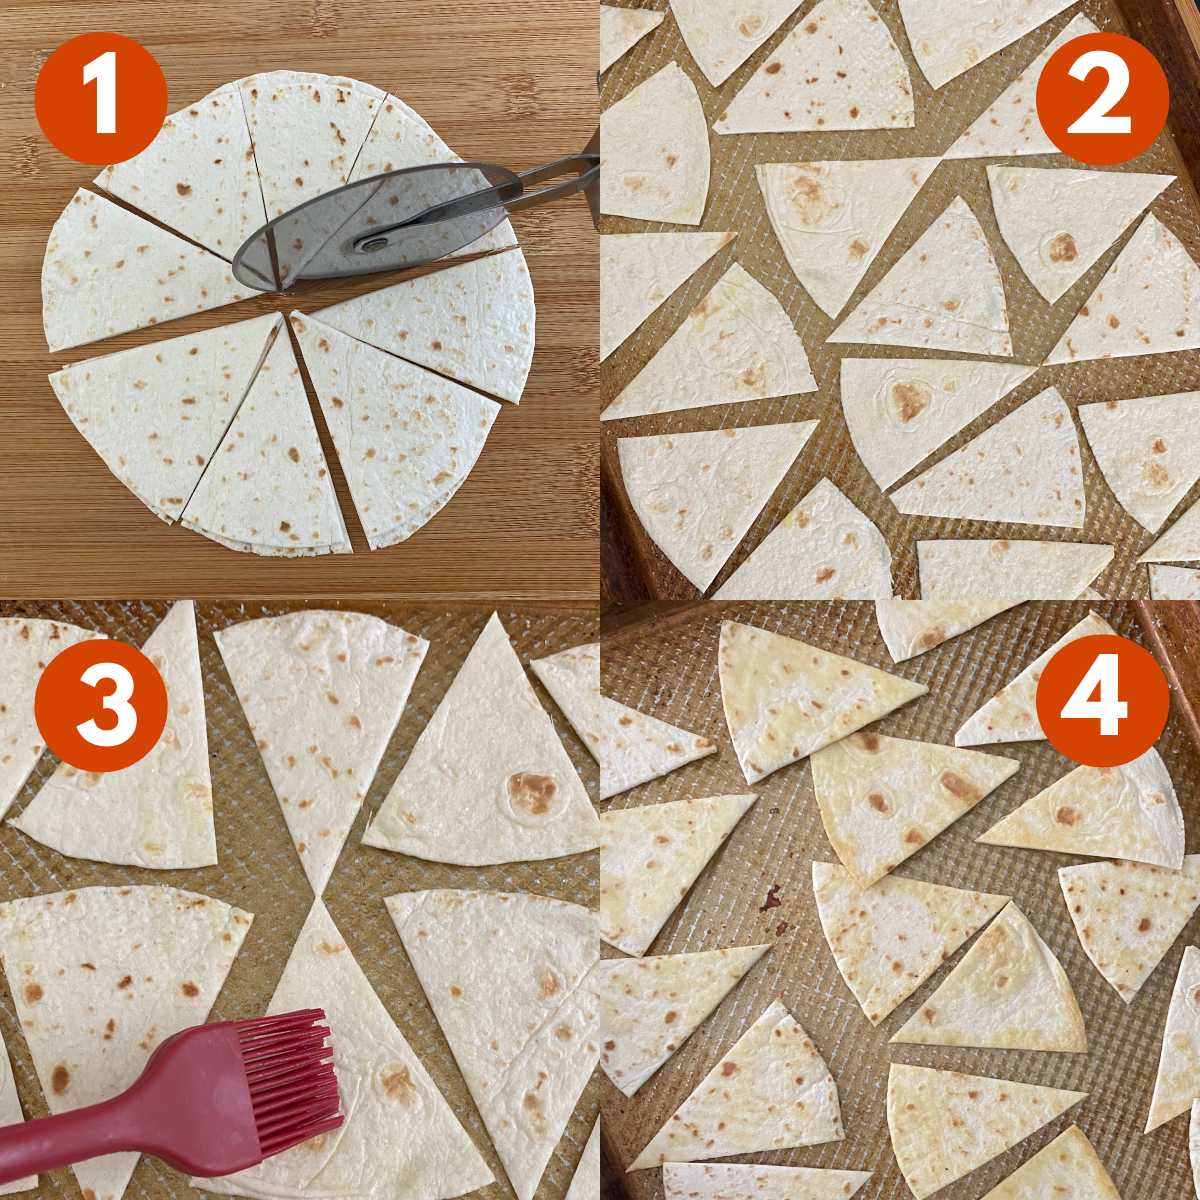 Picture collage to make low-carb tortillas: 1) cutting in ⅛ths 2) spread on pan 3) brushing with olive oil 4) crisped on the pan.